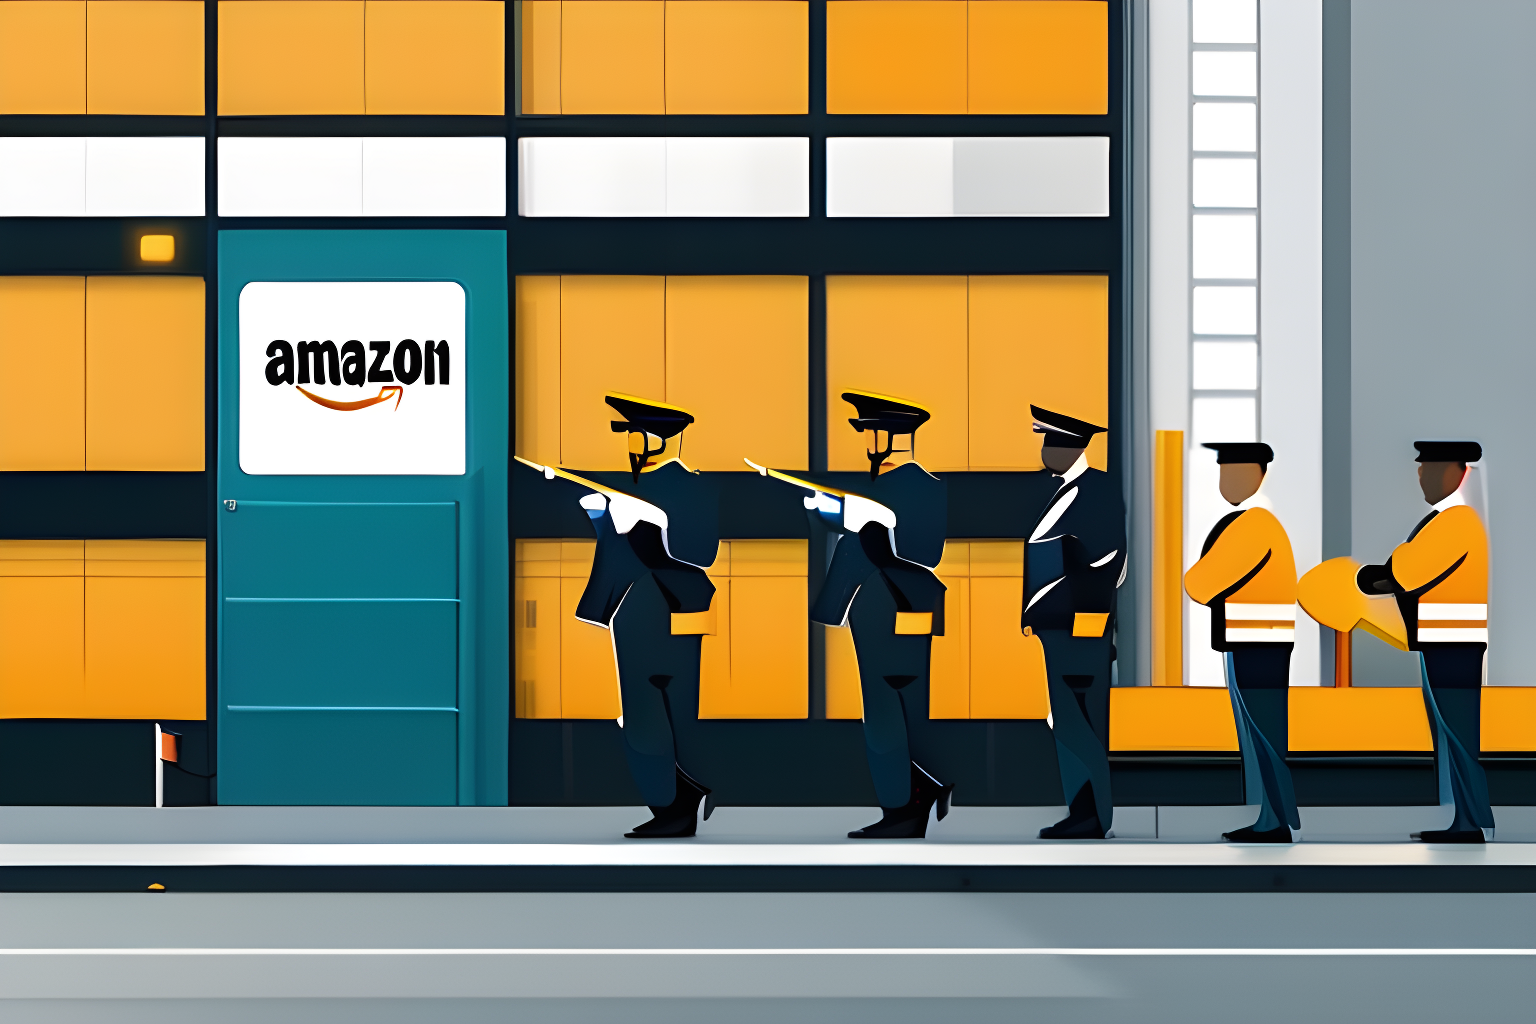 Amazon security guards holding a line